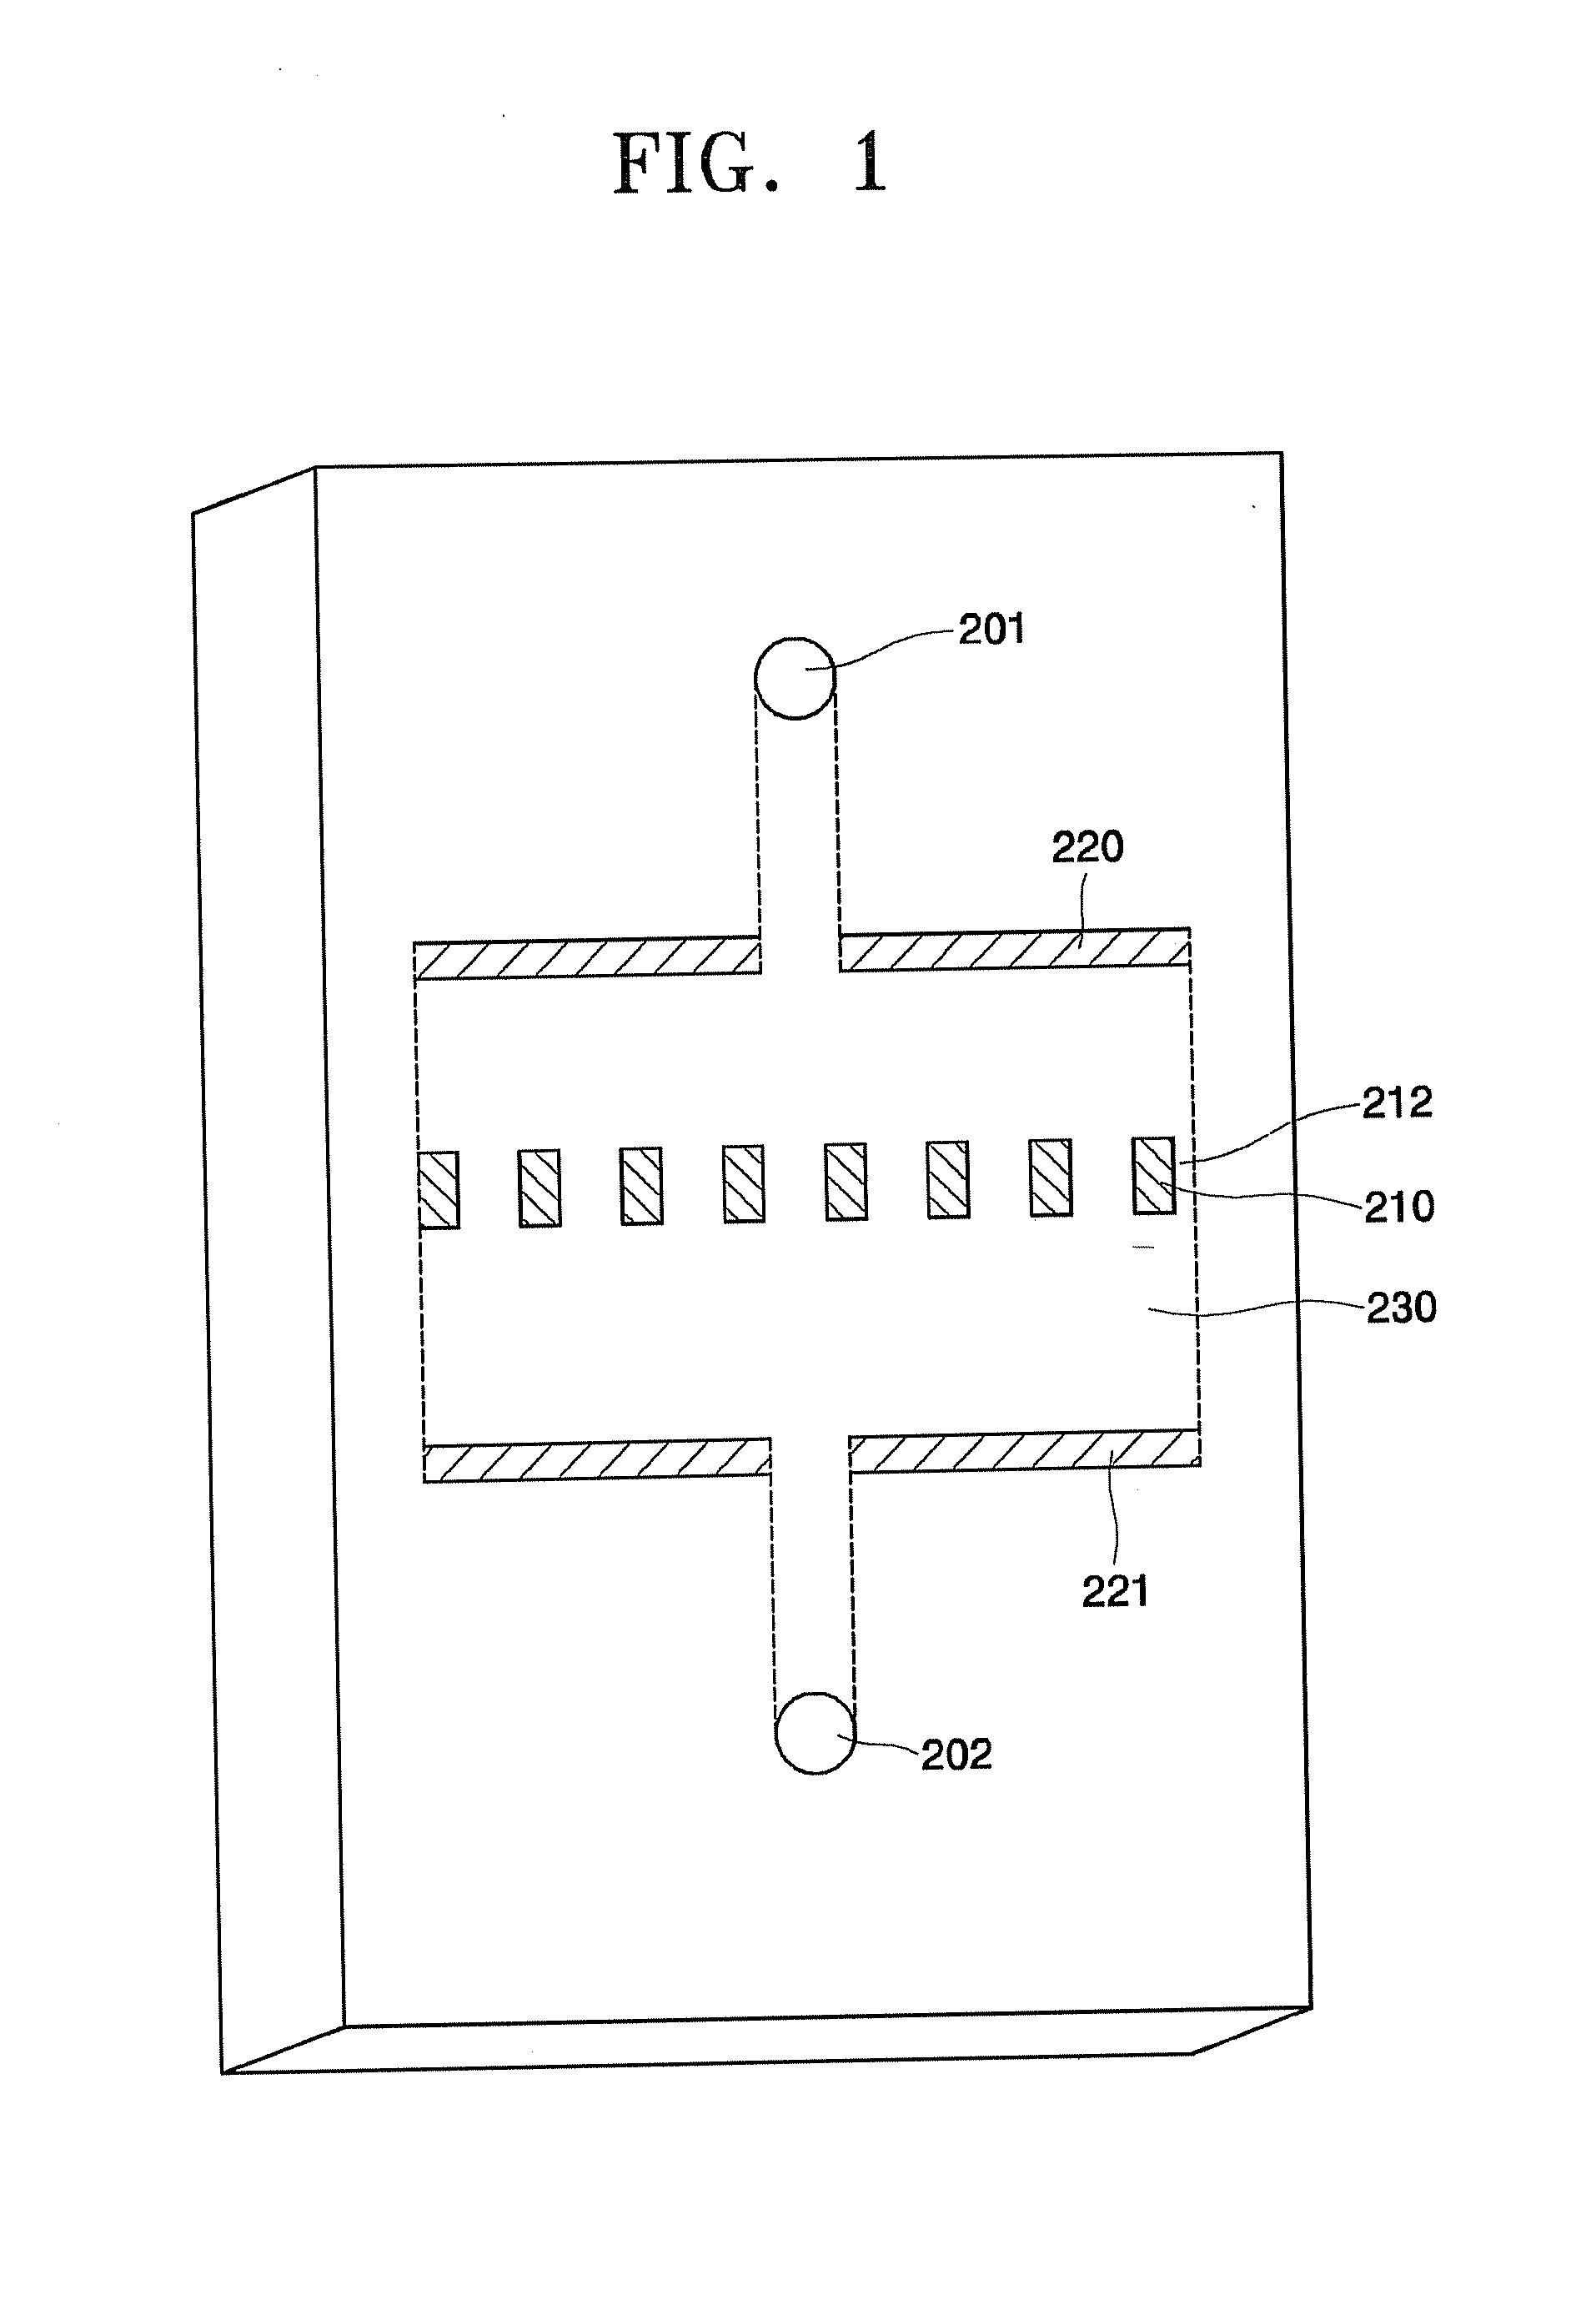 Apparatus for and method of separating polarizable analyte using dielectrophoresis